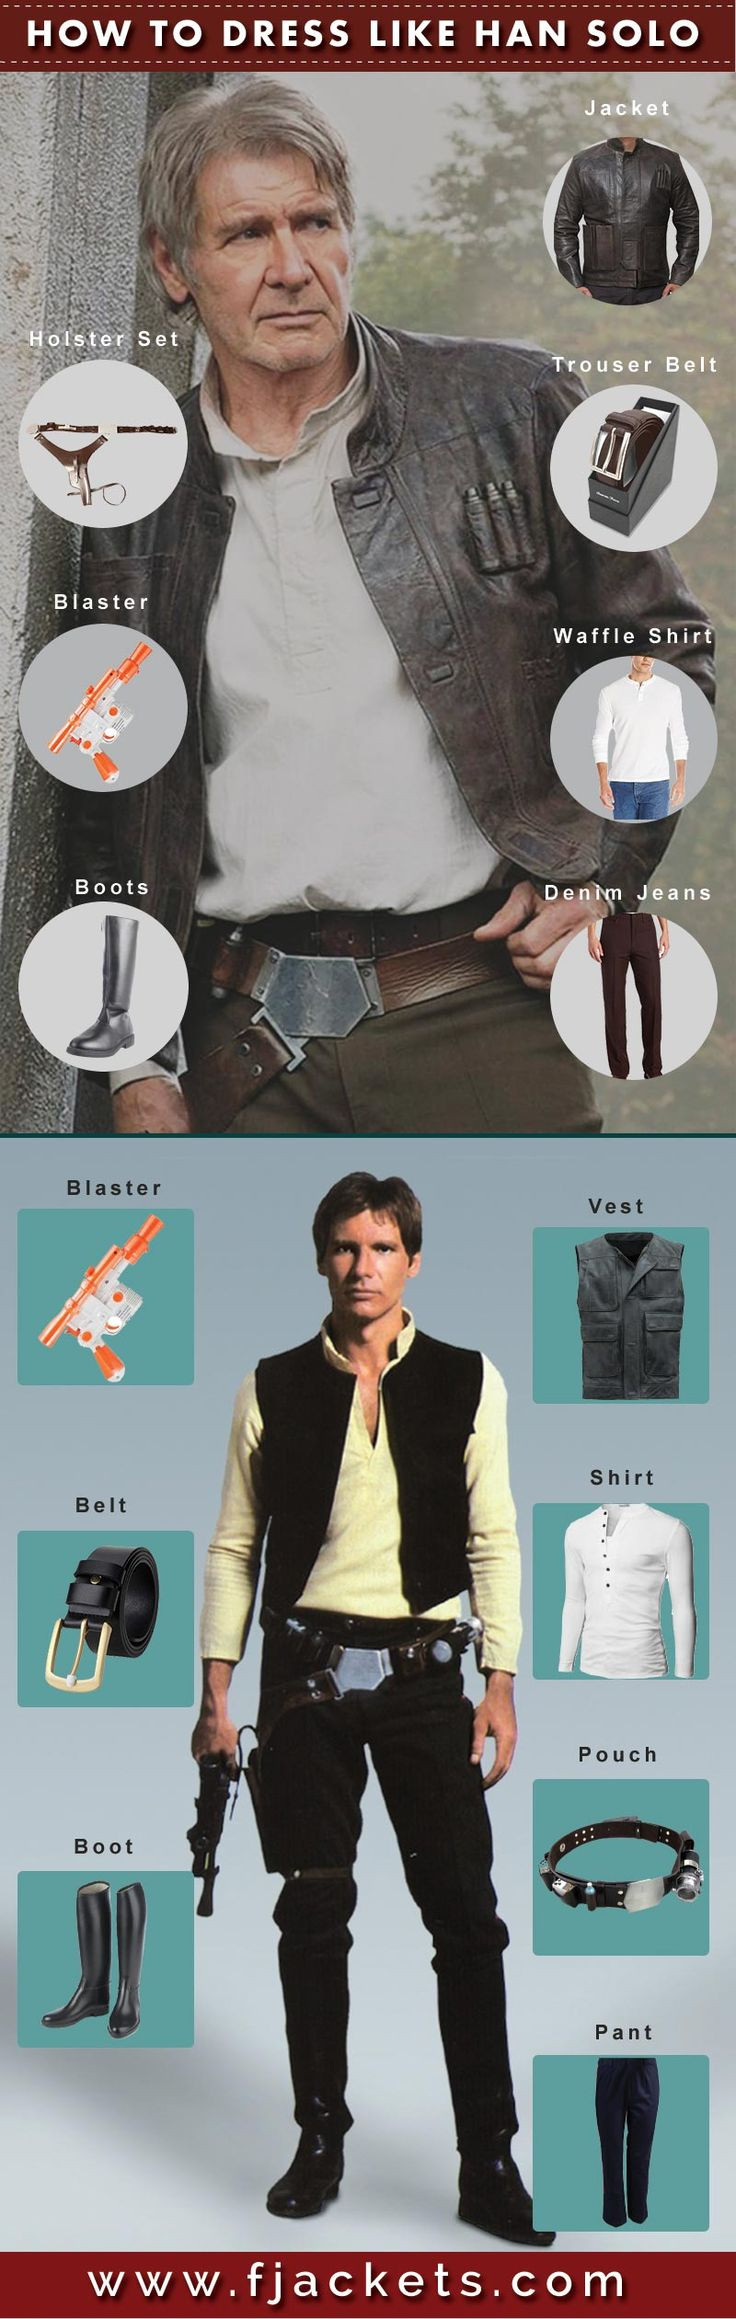 Han Solo DIY Costume
 Best 25 Space costumes ideas on Pinterest